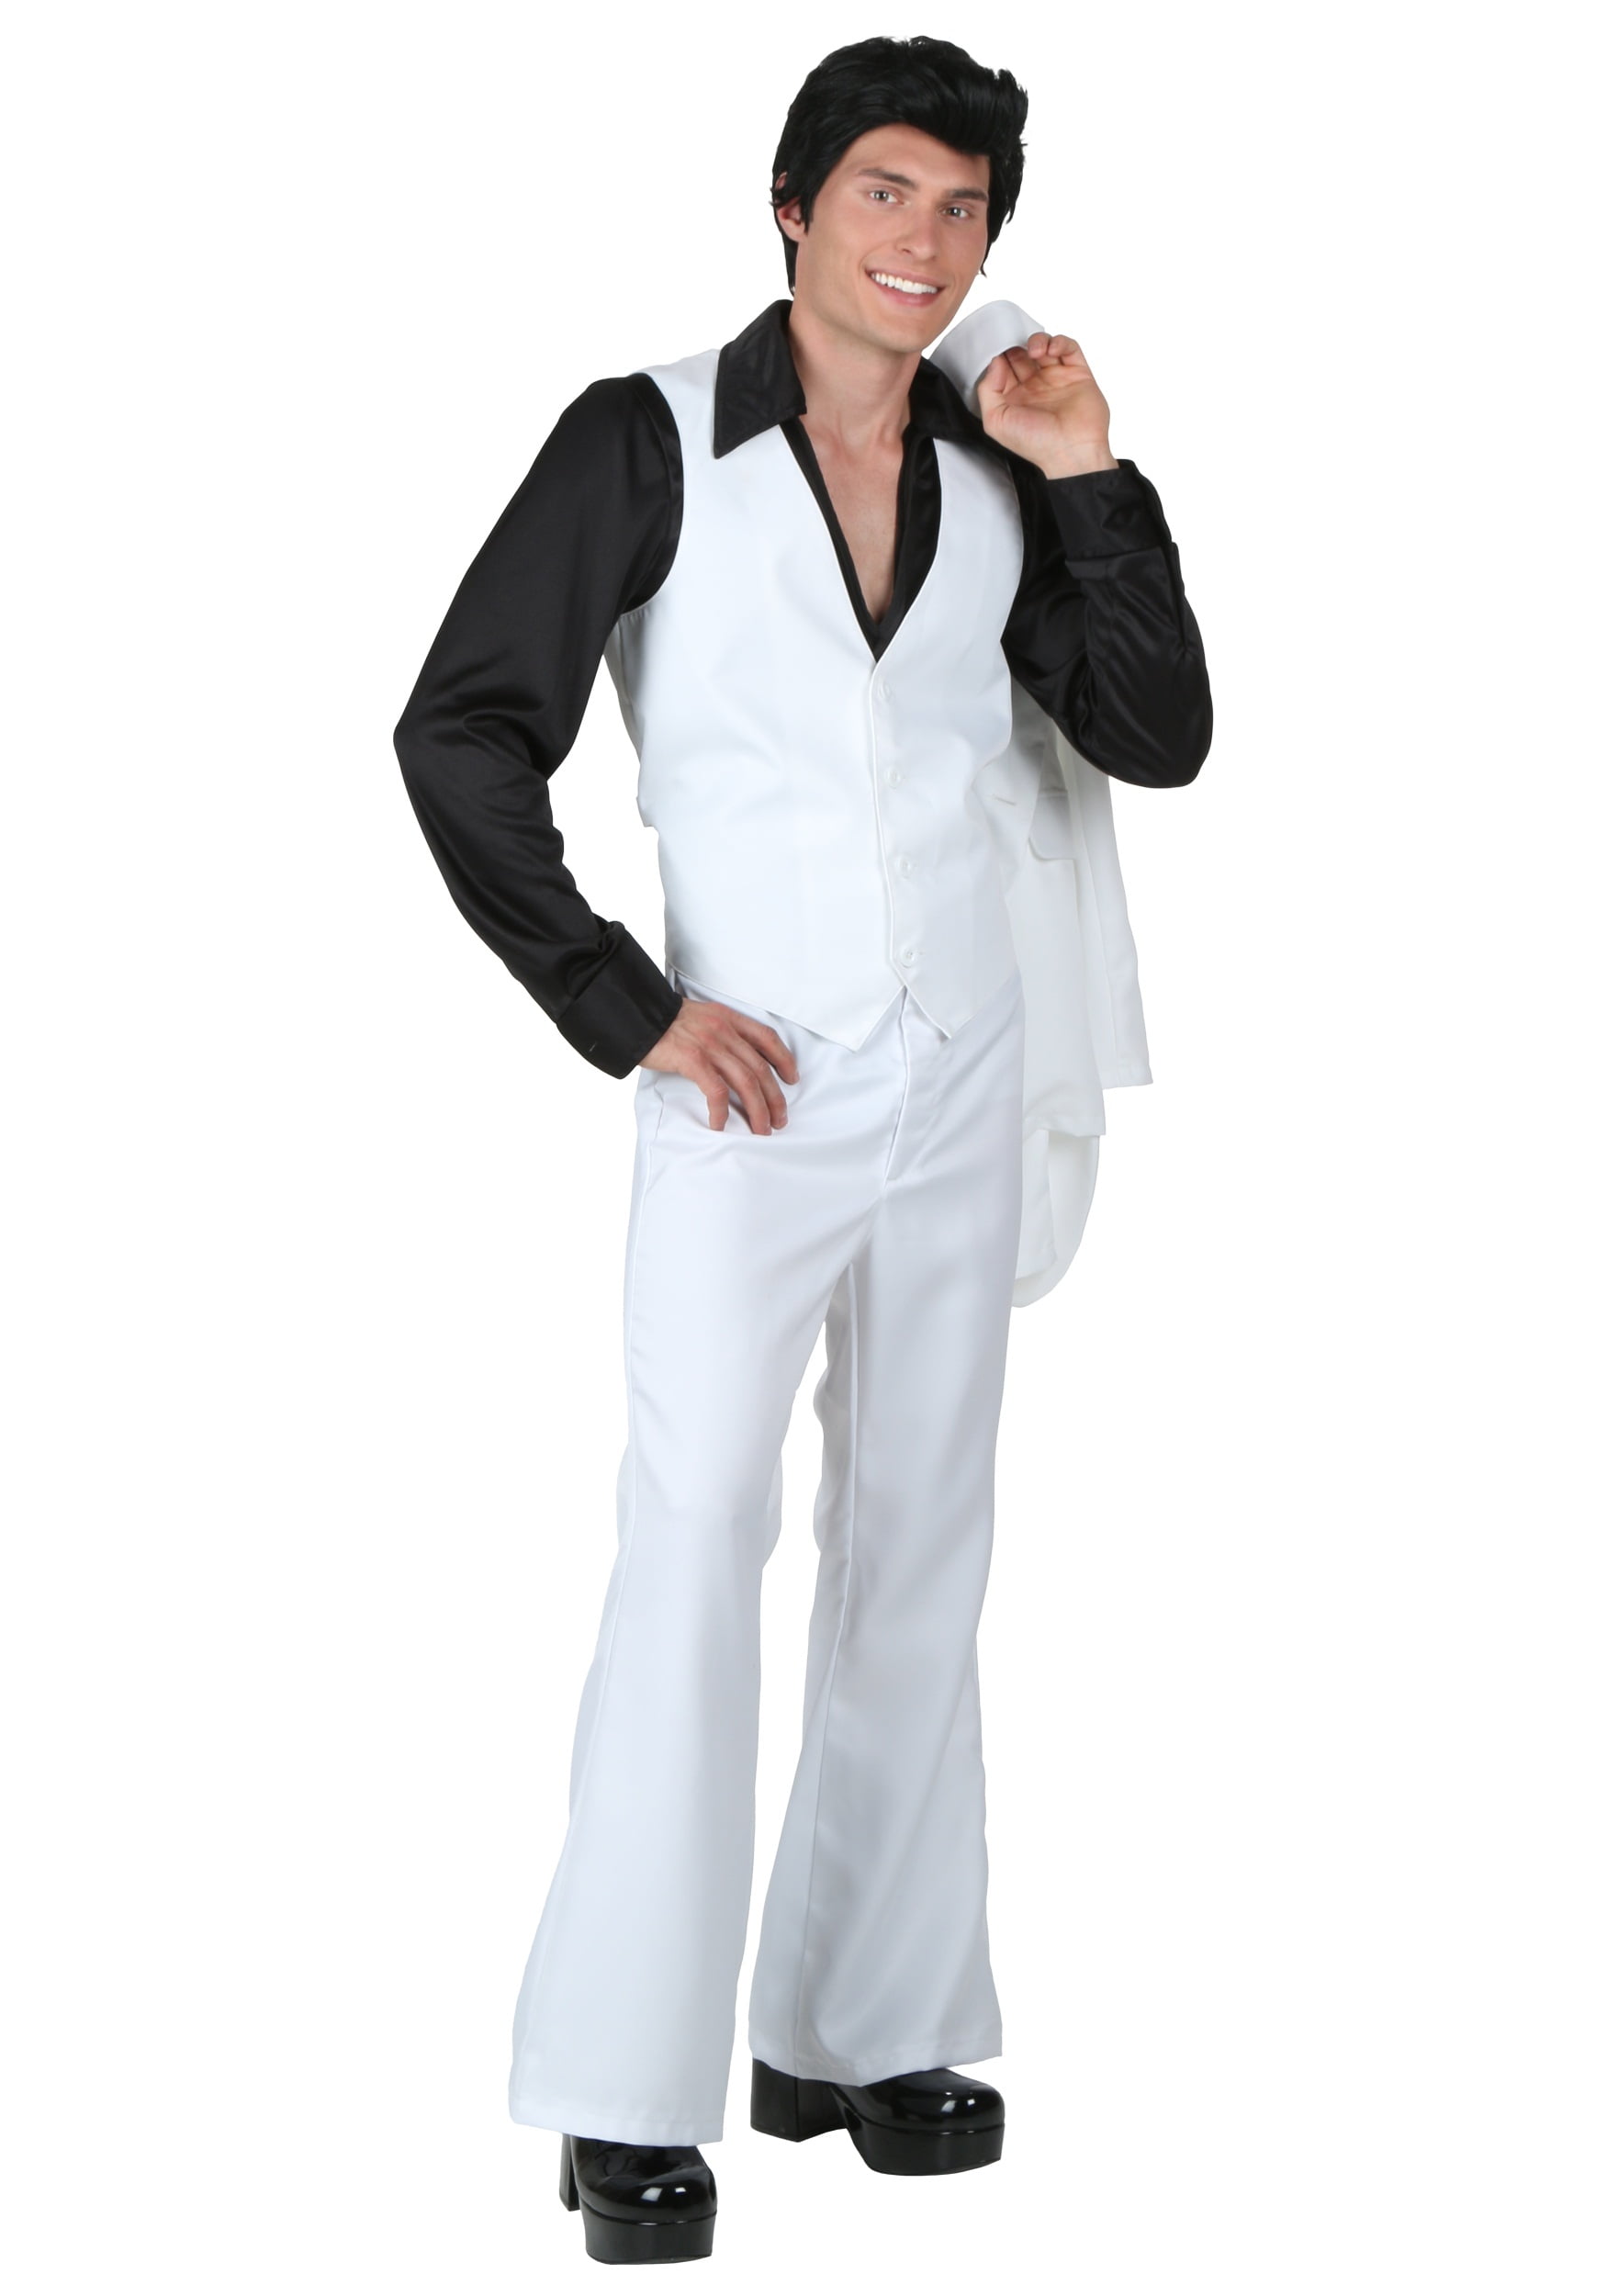 3 pc Disco King Saturday Night Fever White Suit Dress Up Adult Halloween Co...